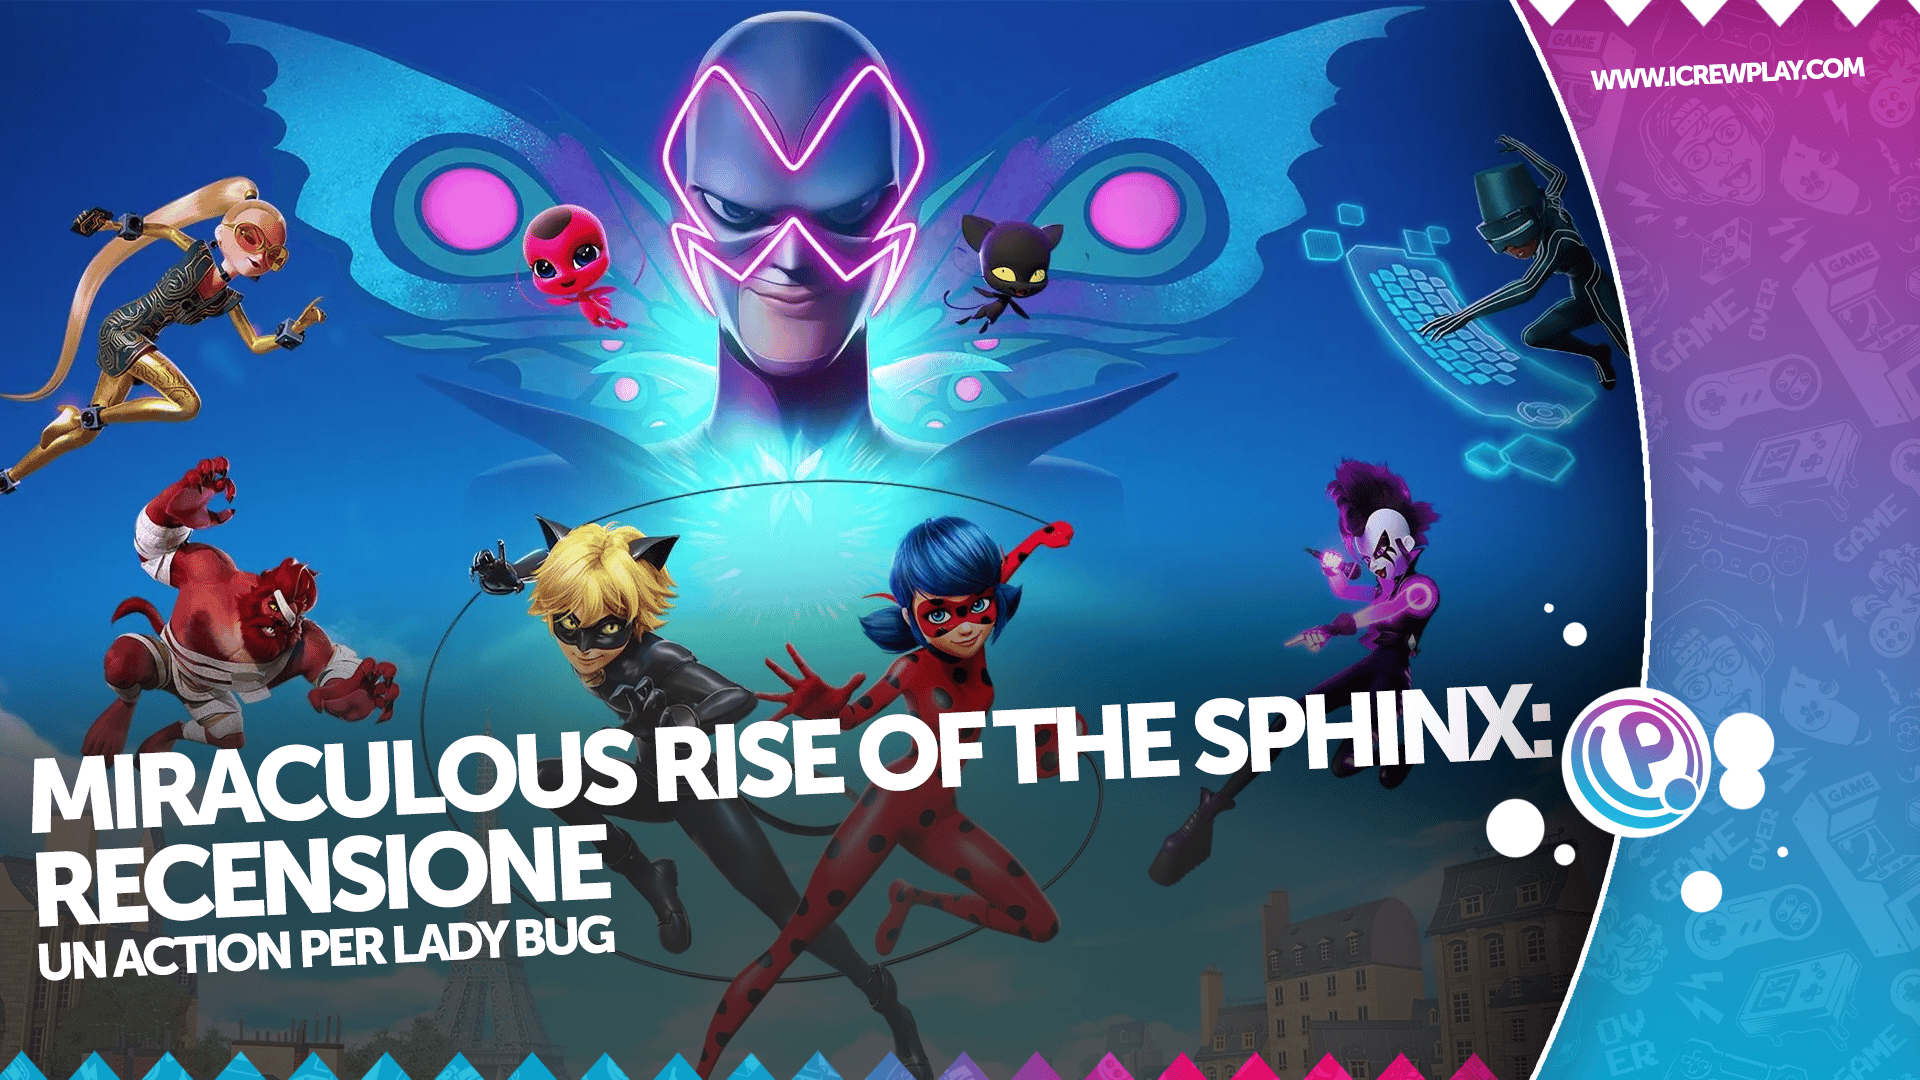 Miraculous rise of the sphinx: recensione per PlayStation 4 8